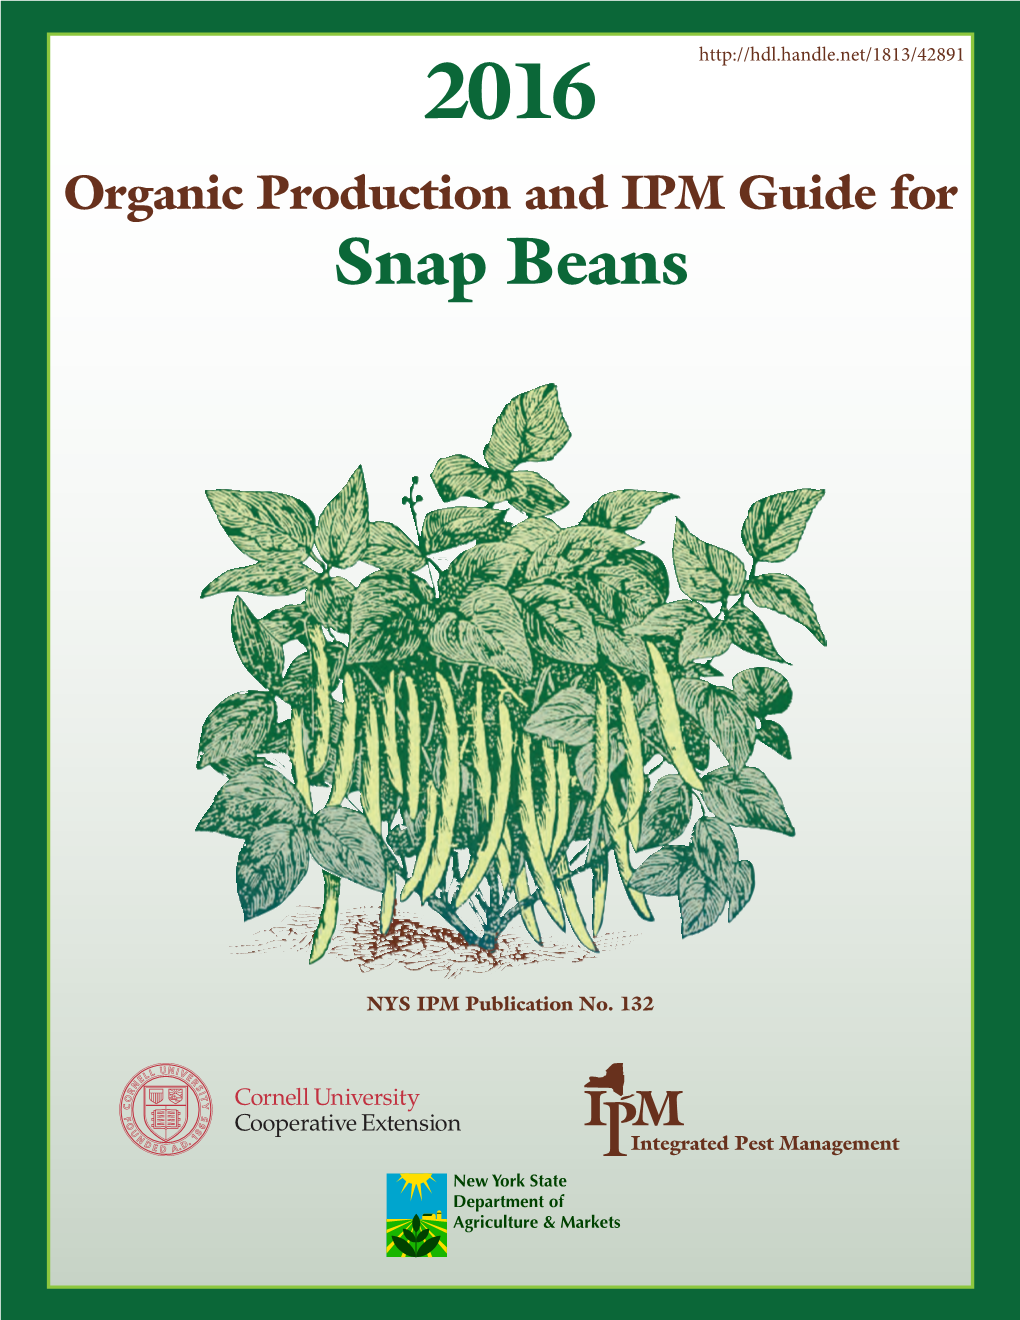 2016 Organic Production and IPM Guide for Snap Beans